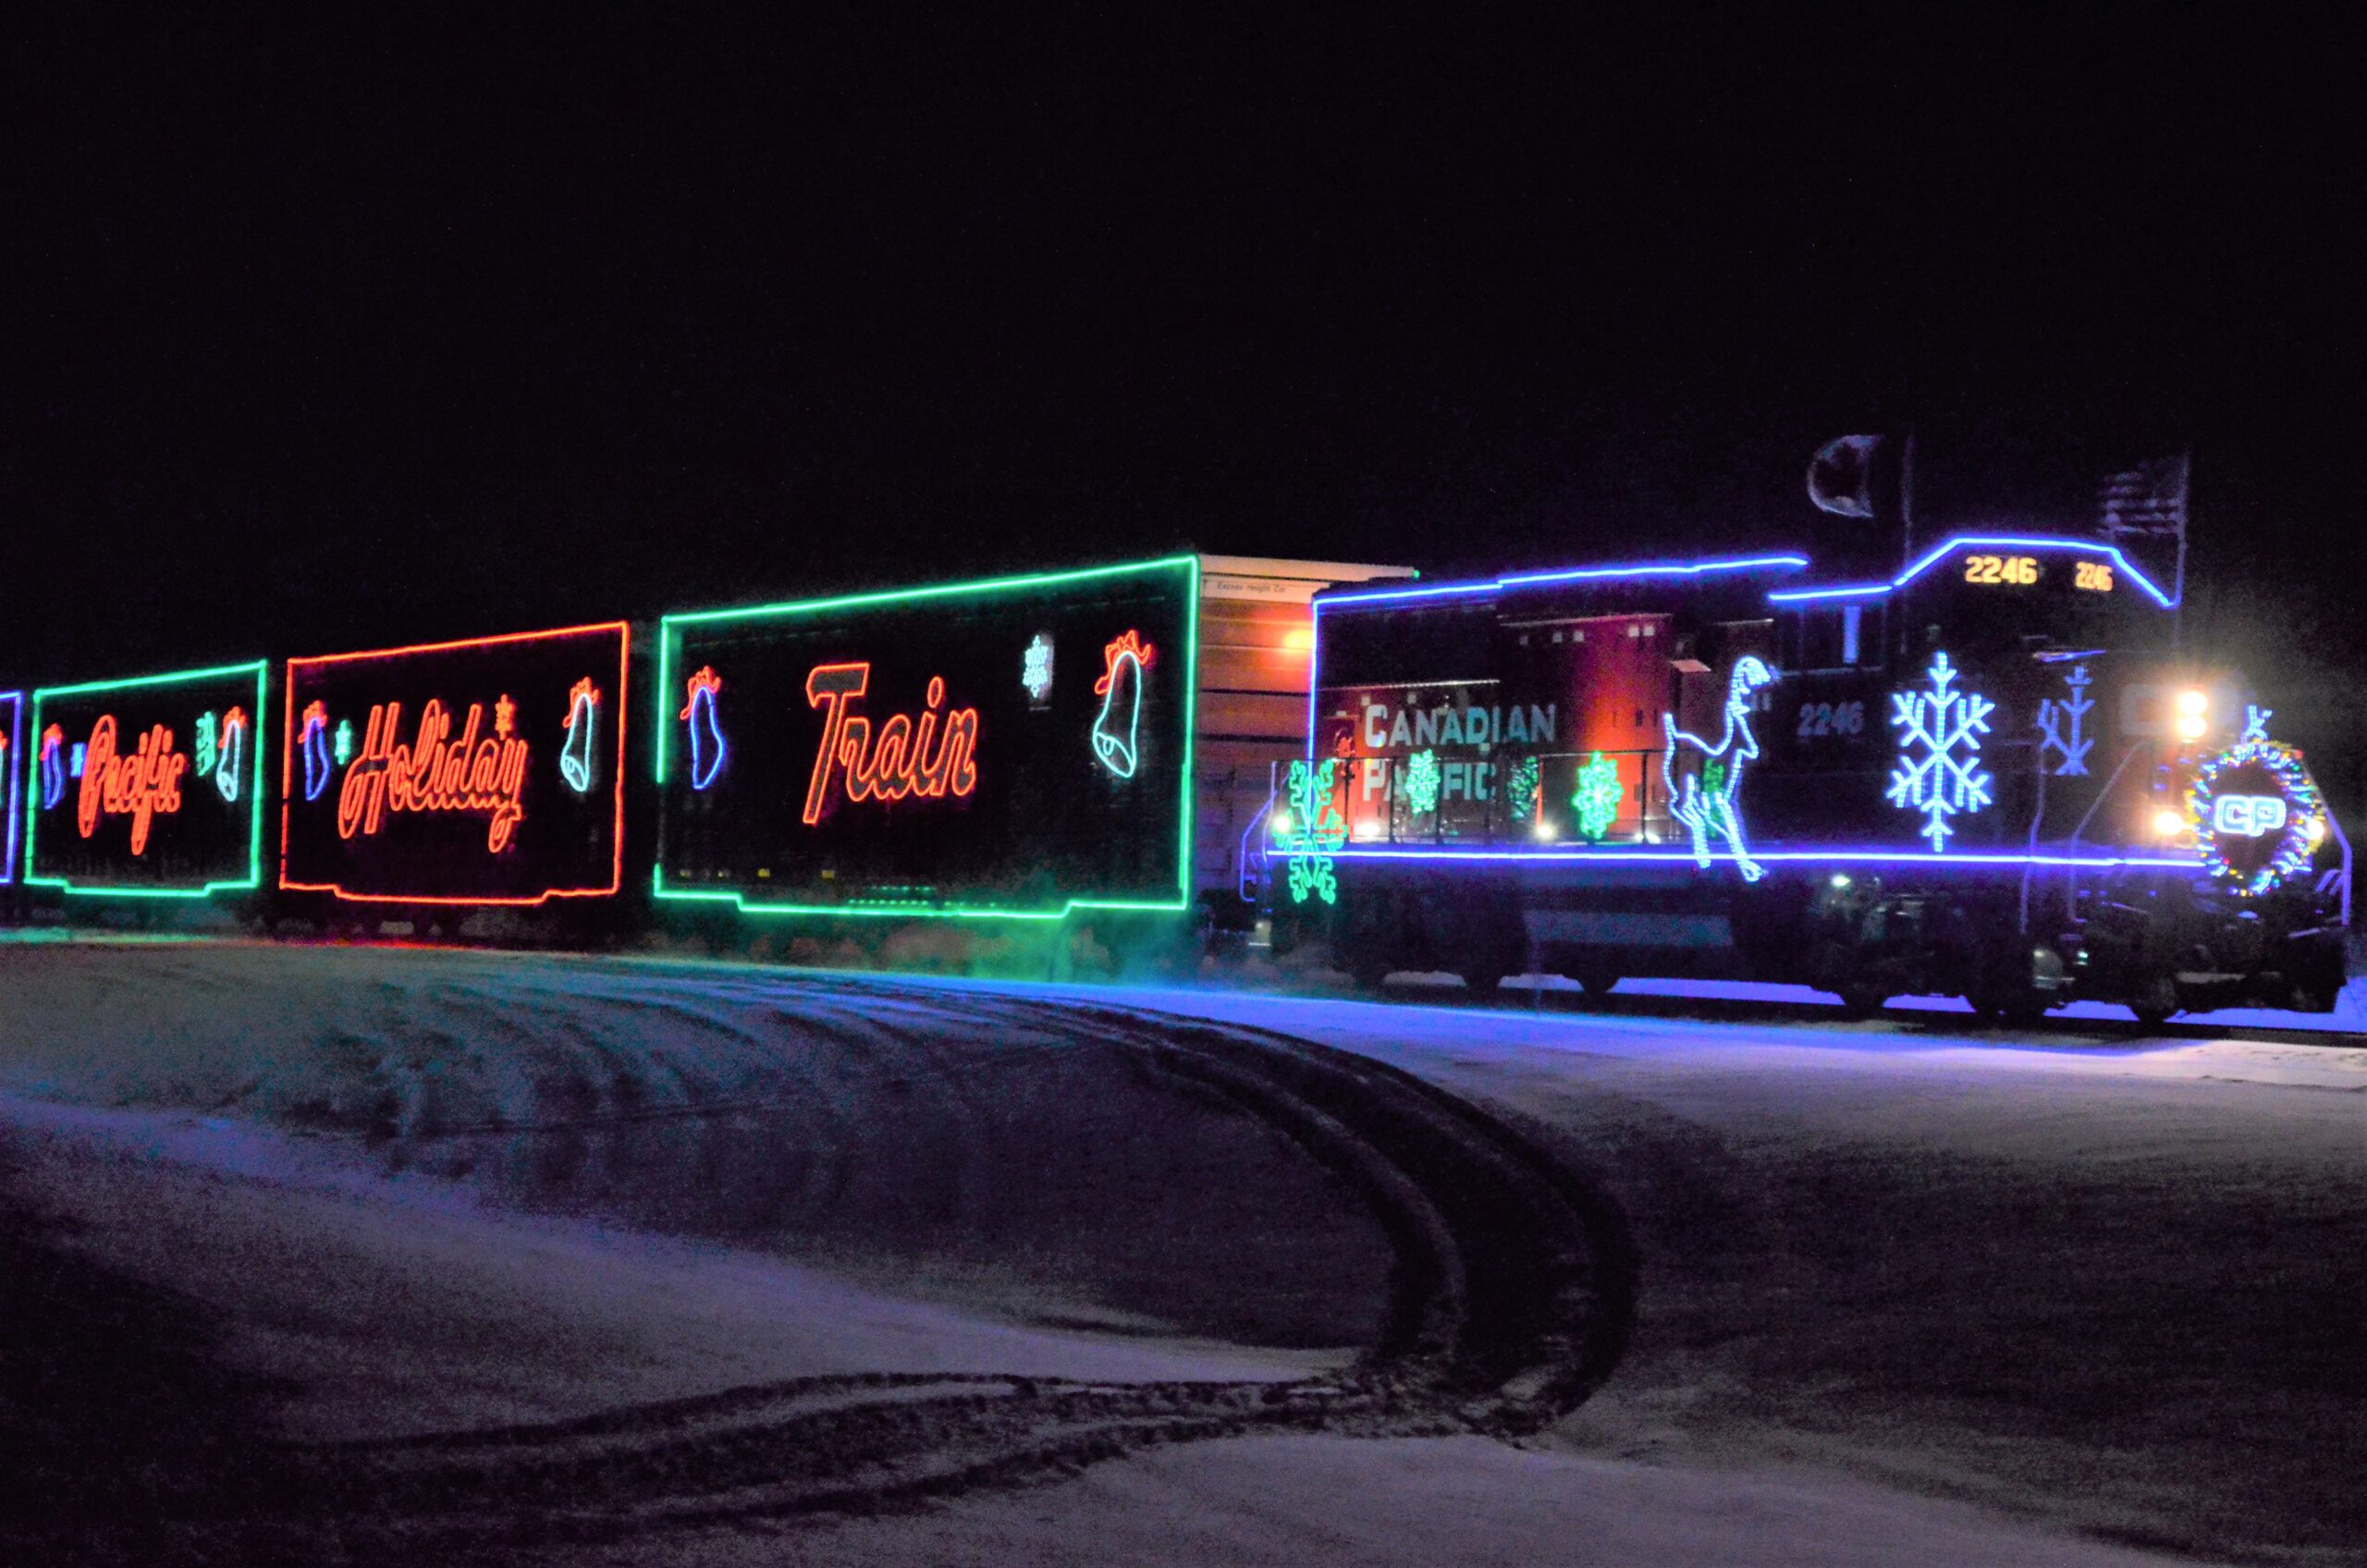 Holiday Train is coming to town Maple Lake Messenger